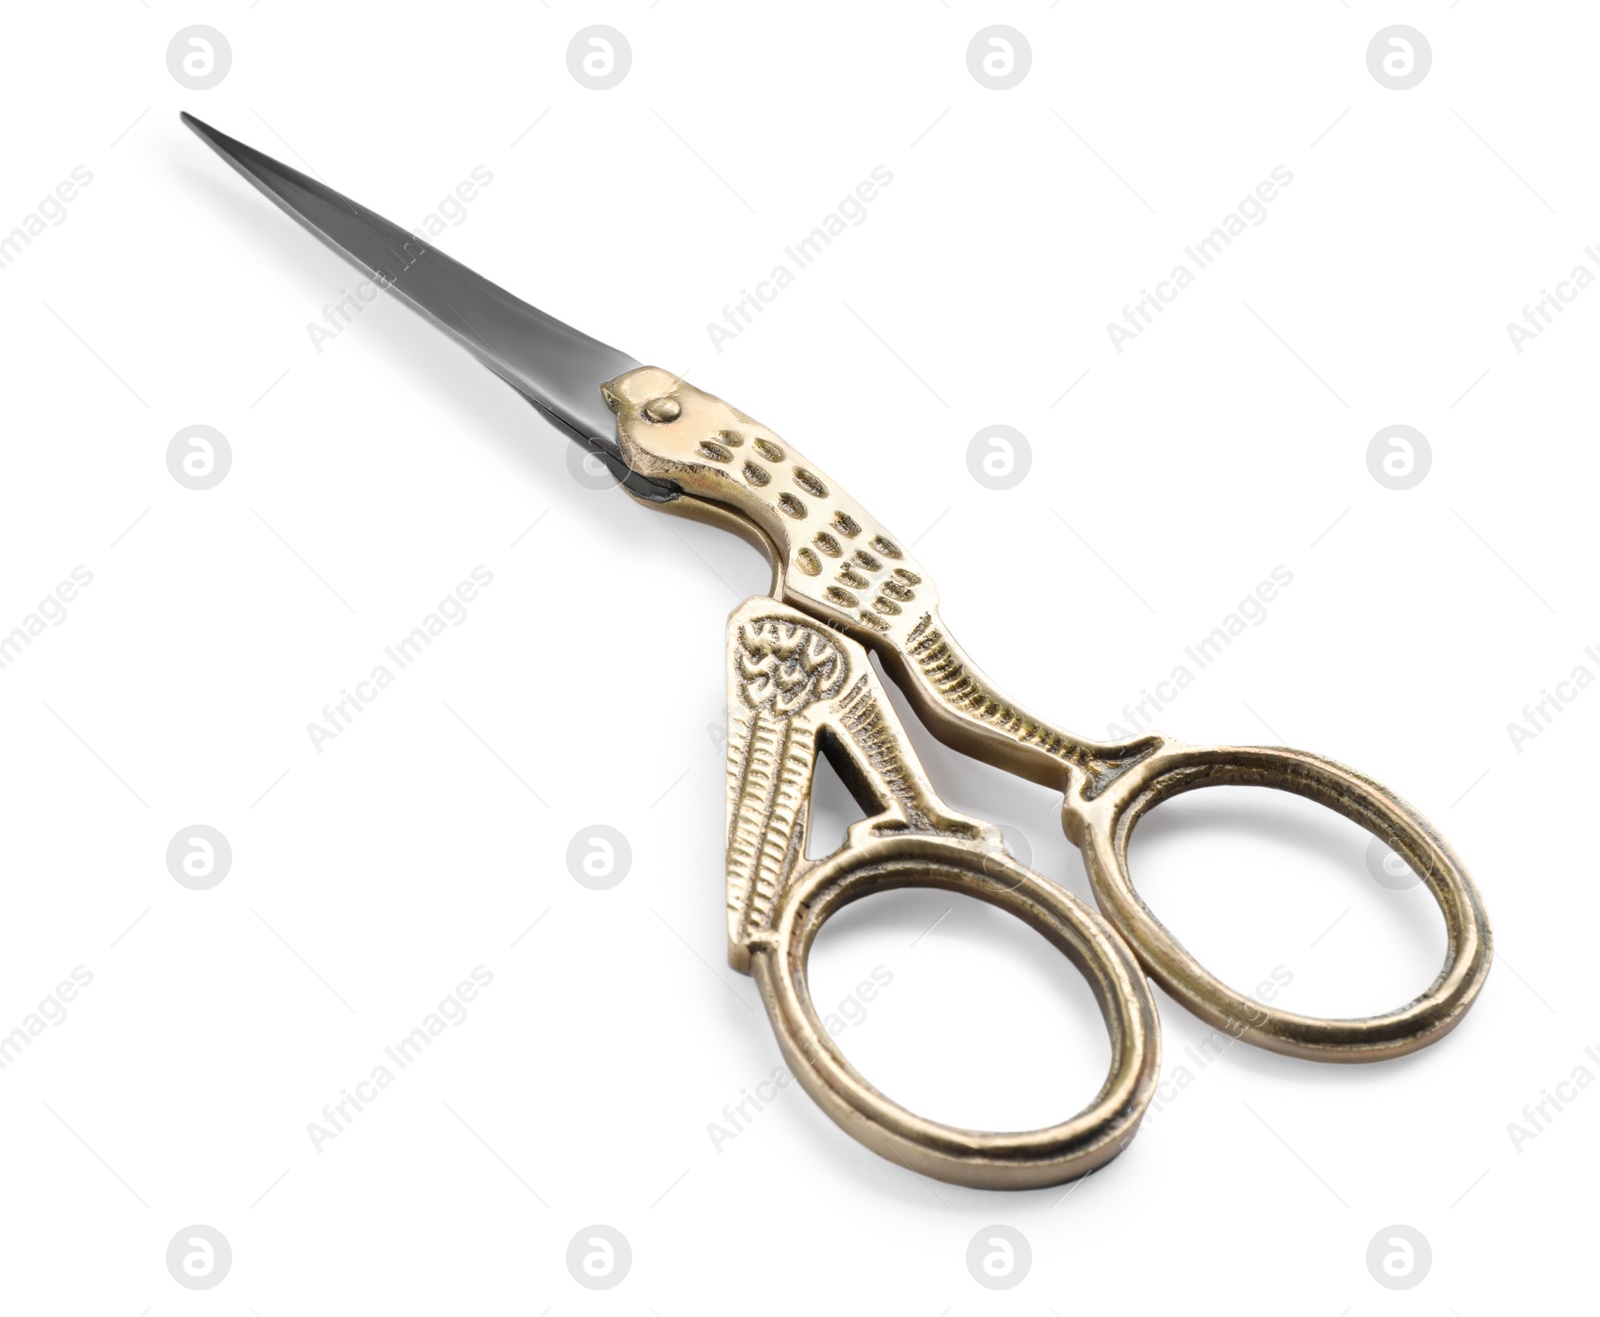 Photo of Pair of scissors with ornate handles isolated on white